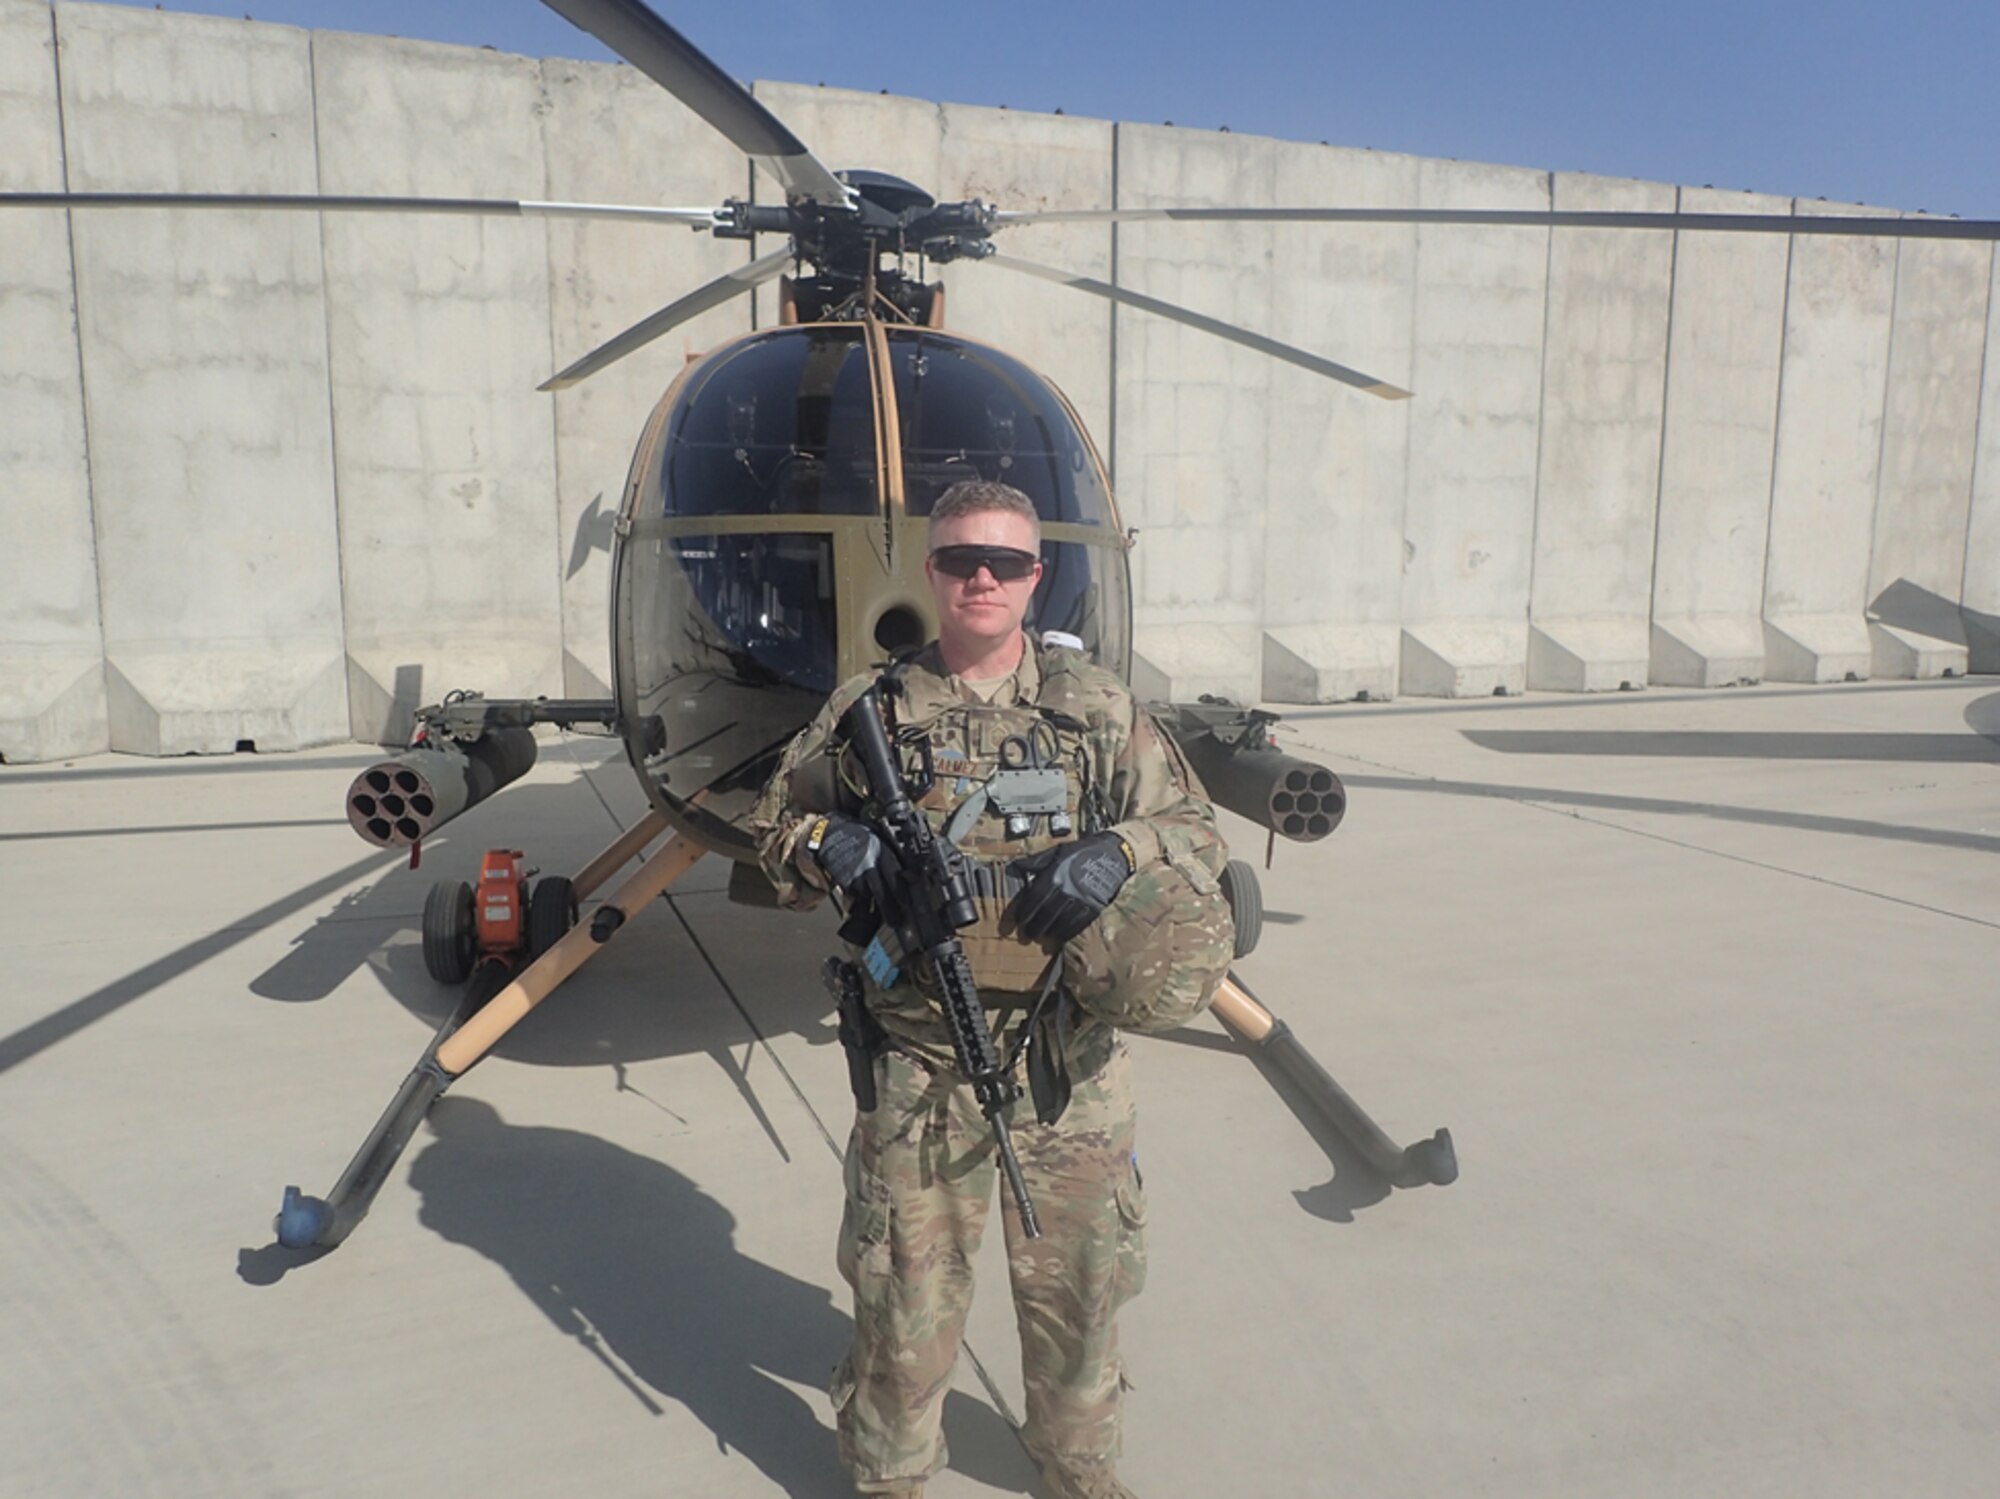 Senior Master Sgt. Travis J. Calmez stands in front of a MD-530 helicopter on Forward Operating Base Oqab, Kabul, Afghanistan May 10, 2018.